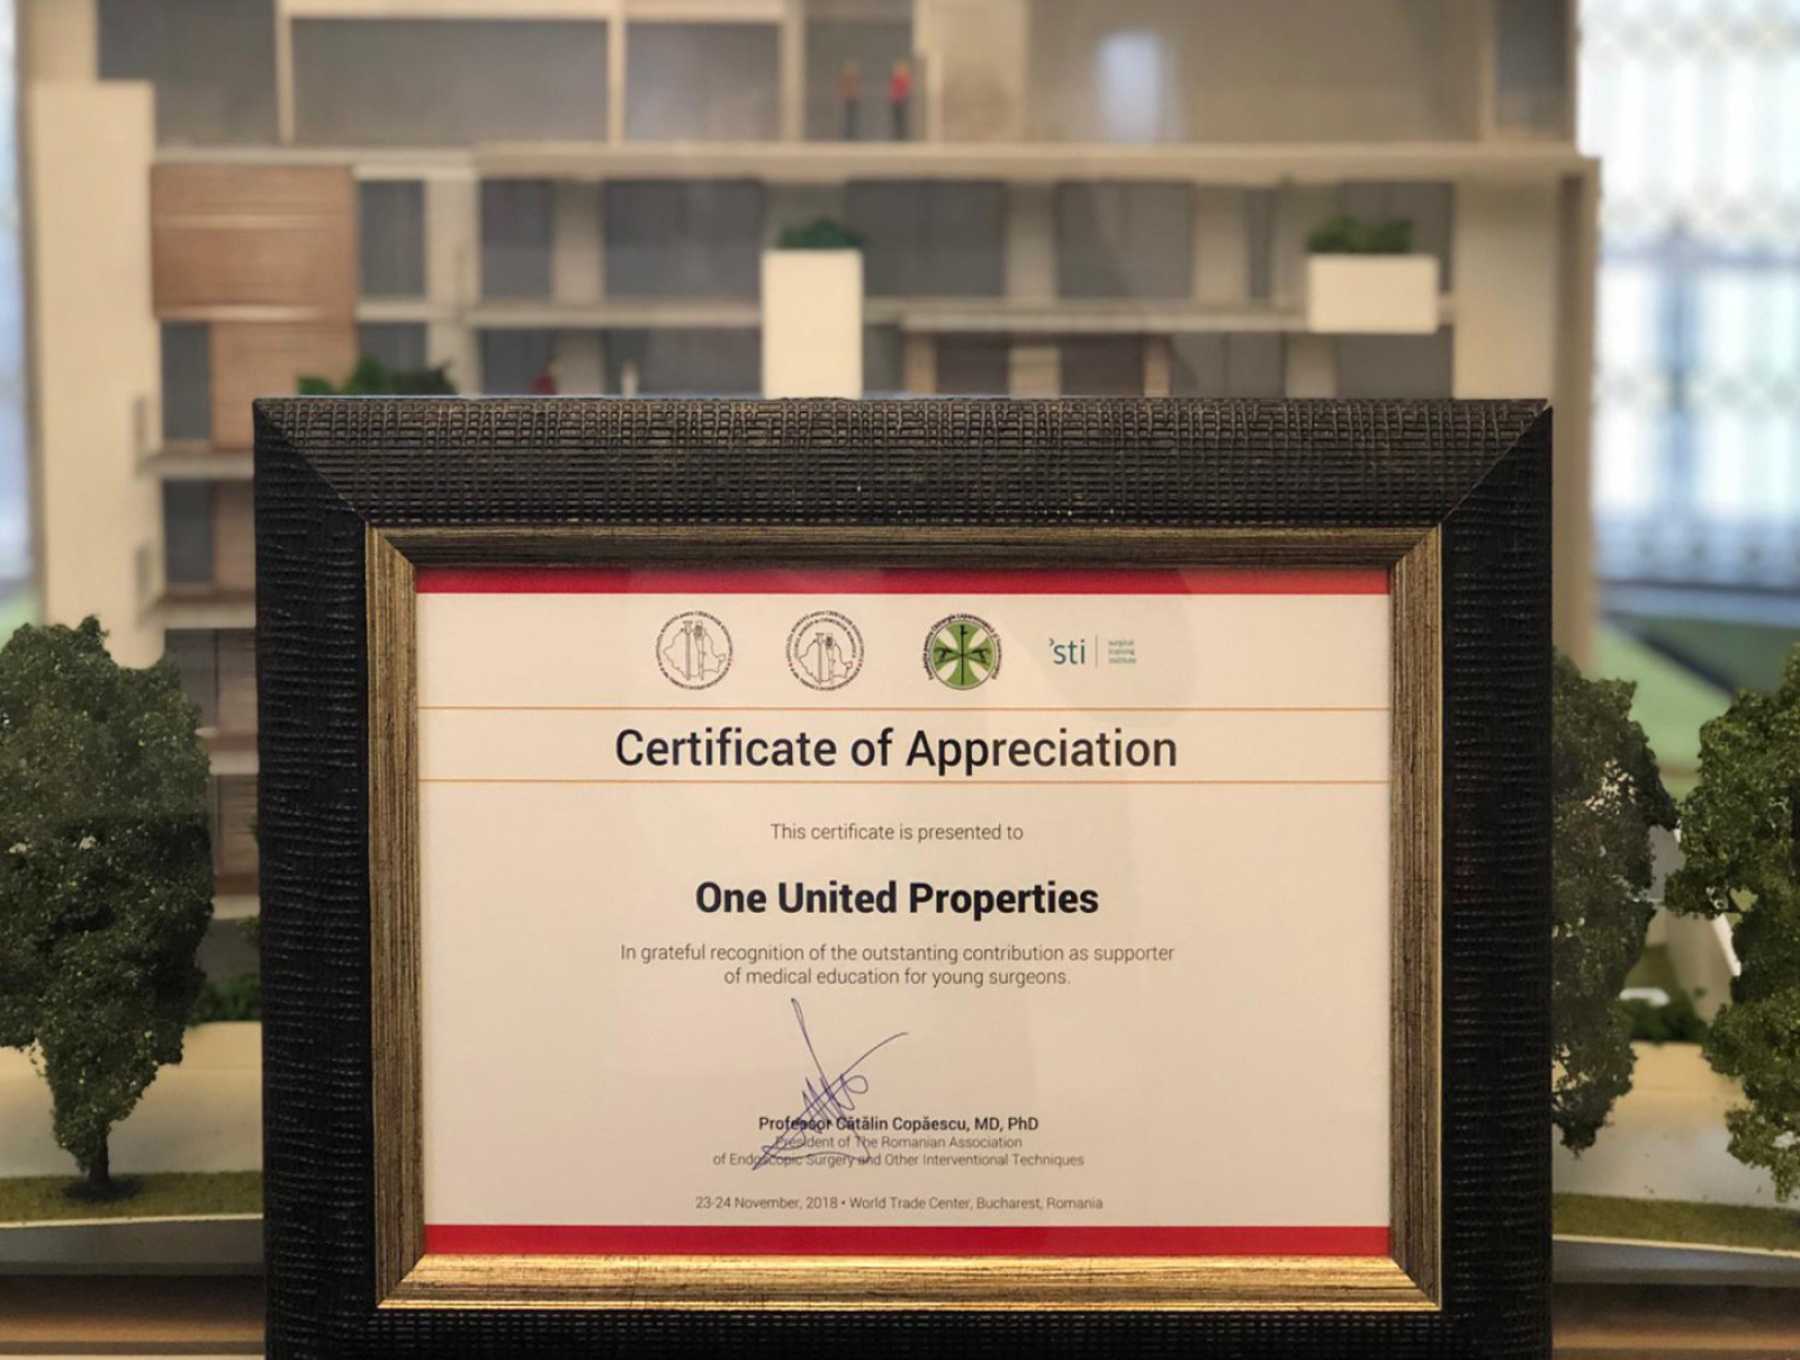 One United Properties to receive the ARCE Certificate of Appreciation